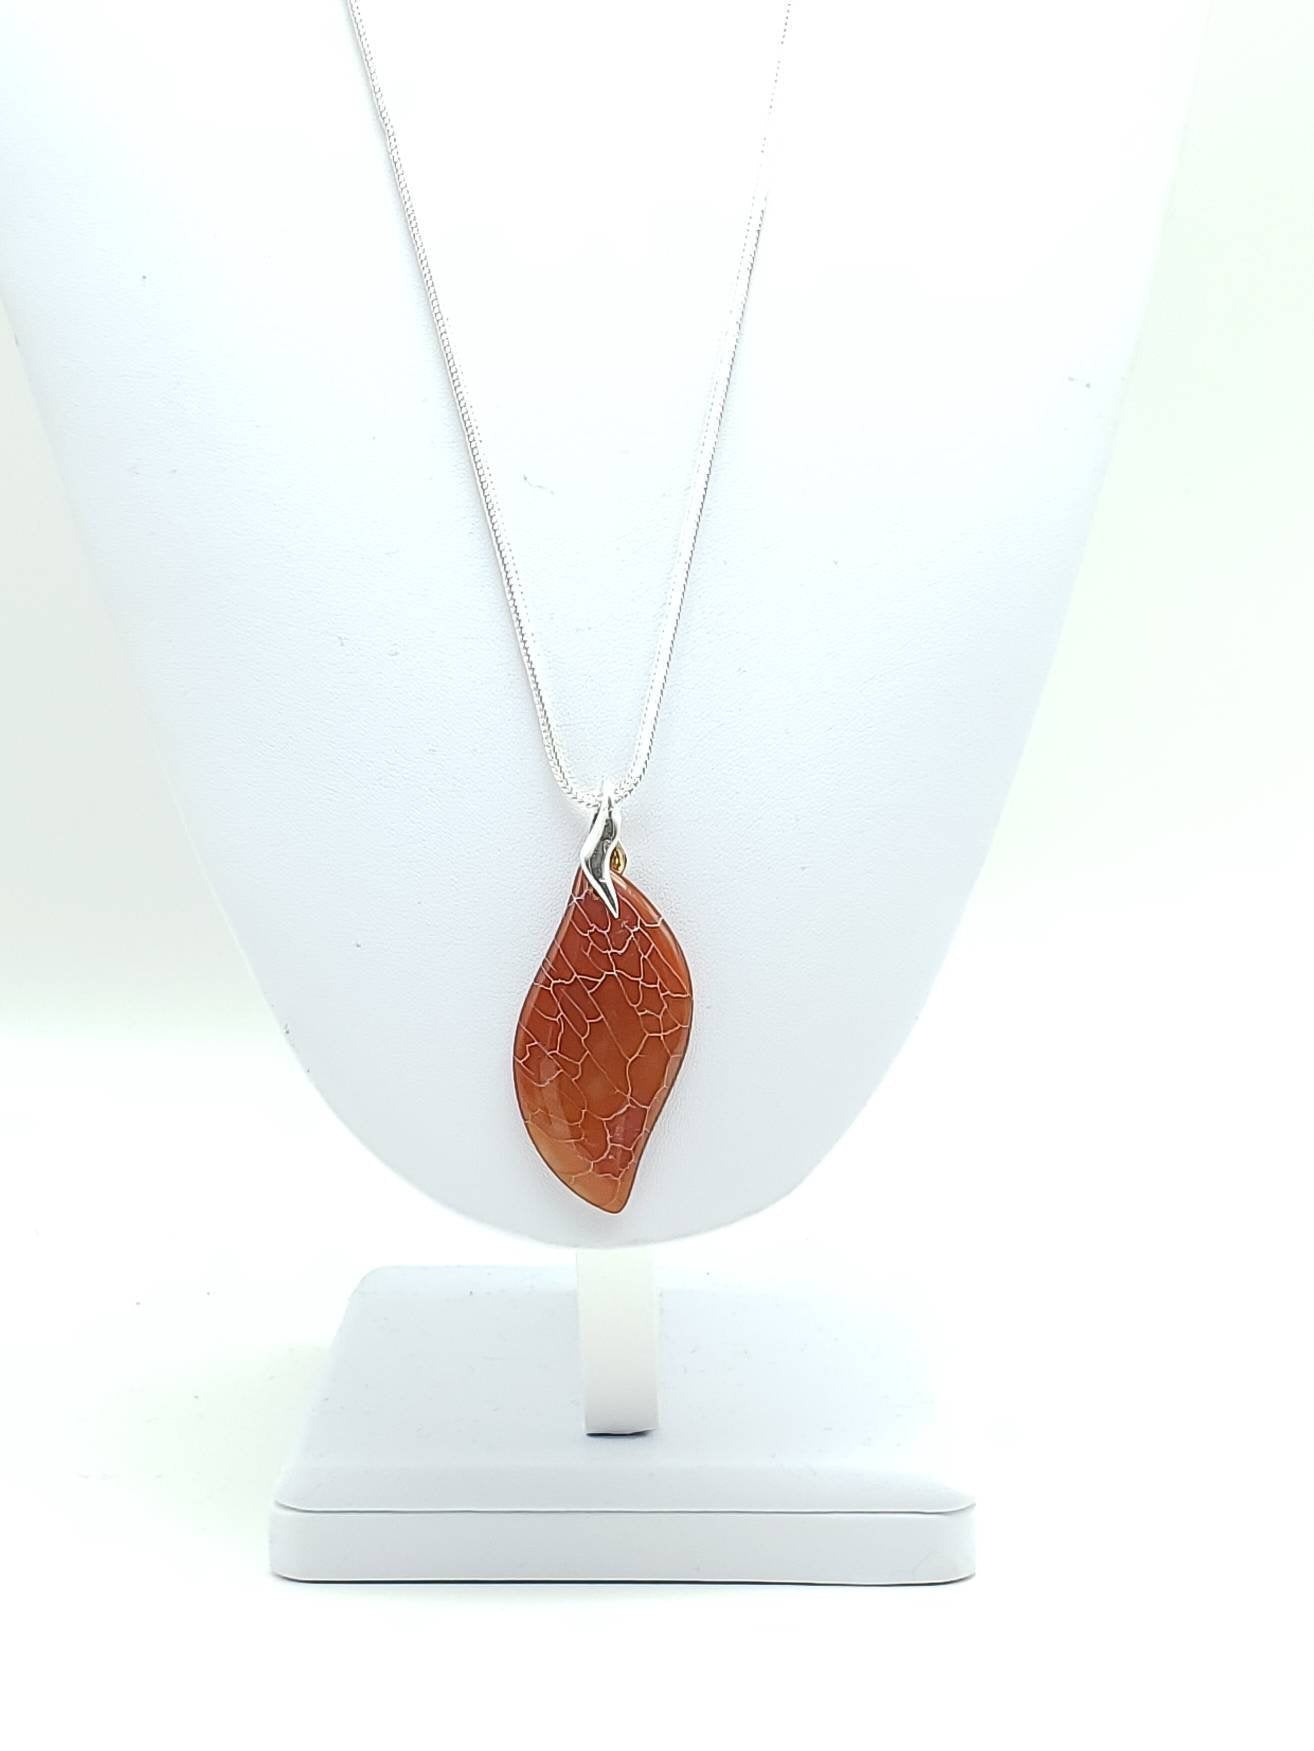 Dragon Vein Agate Pendant Necklace - The Caffeinated Raven